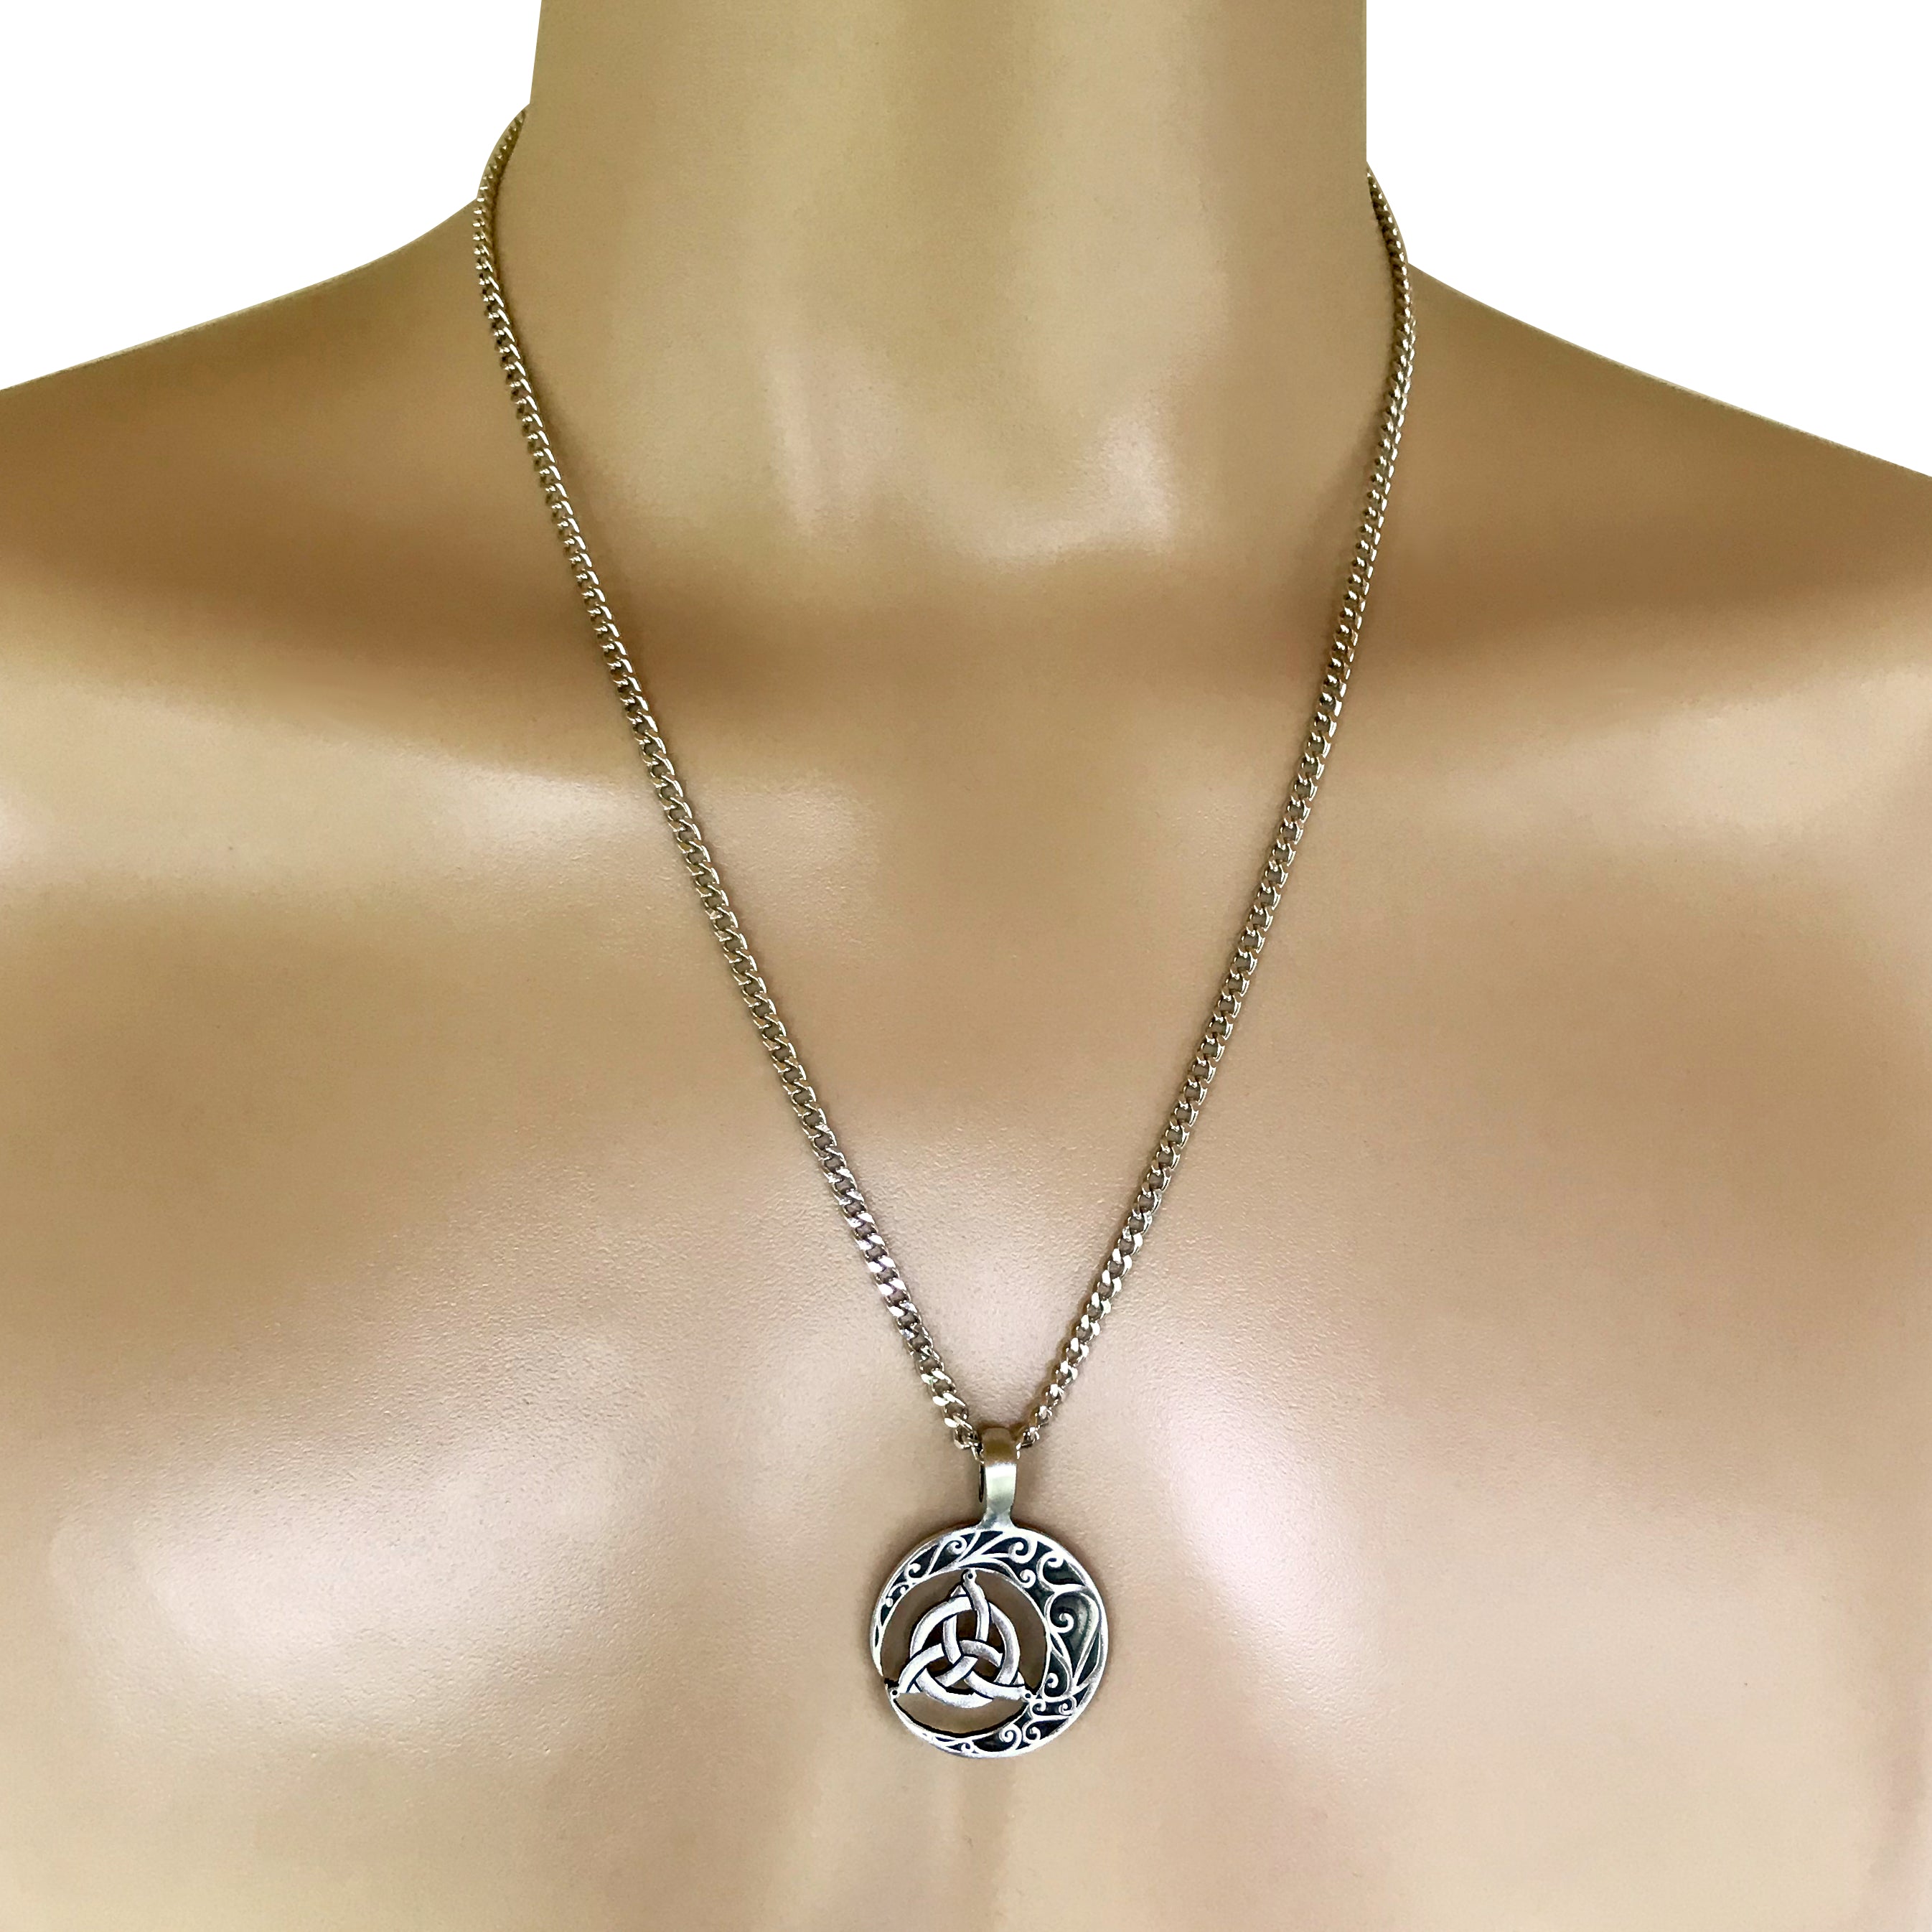 Anatomical Heart Necklace - Pewter | Boutique Academia